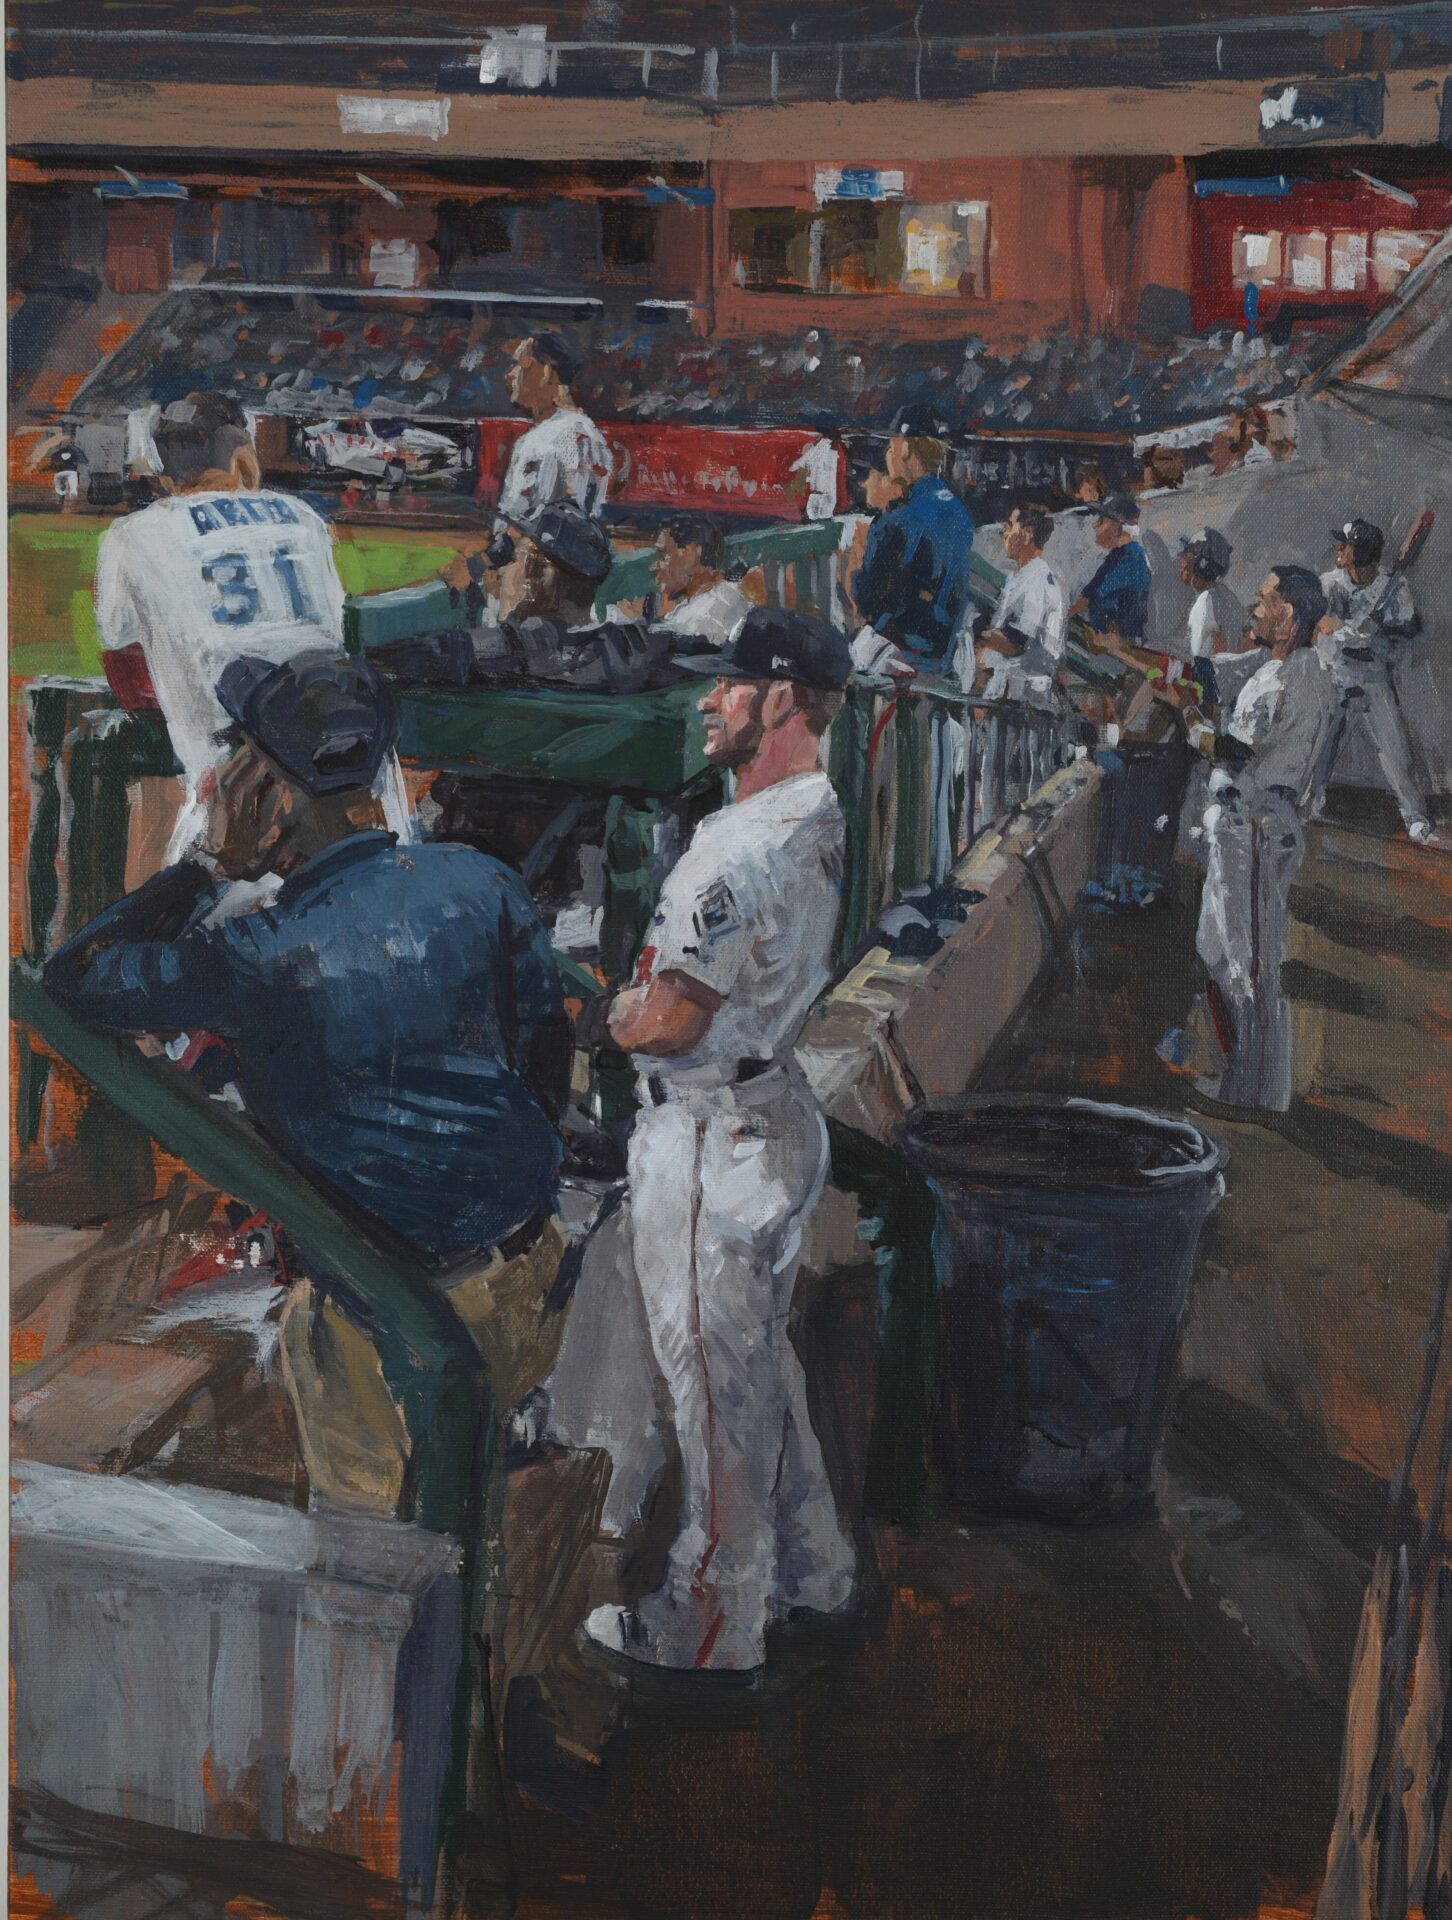 DUGOUT AT NIGHT<br>
2018<br>
24" x 18"
